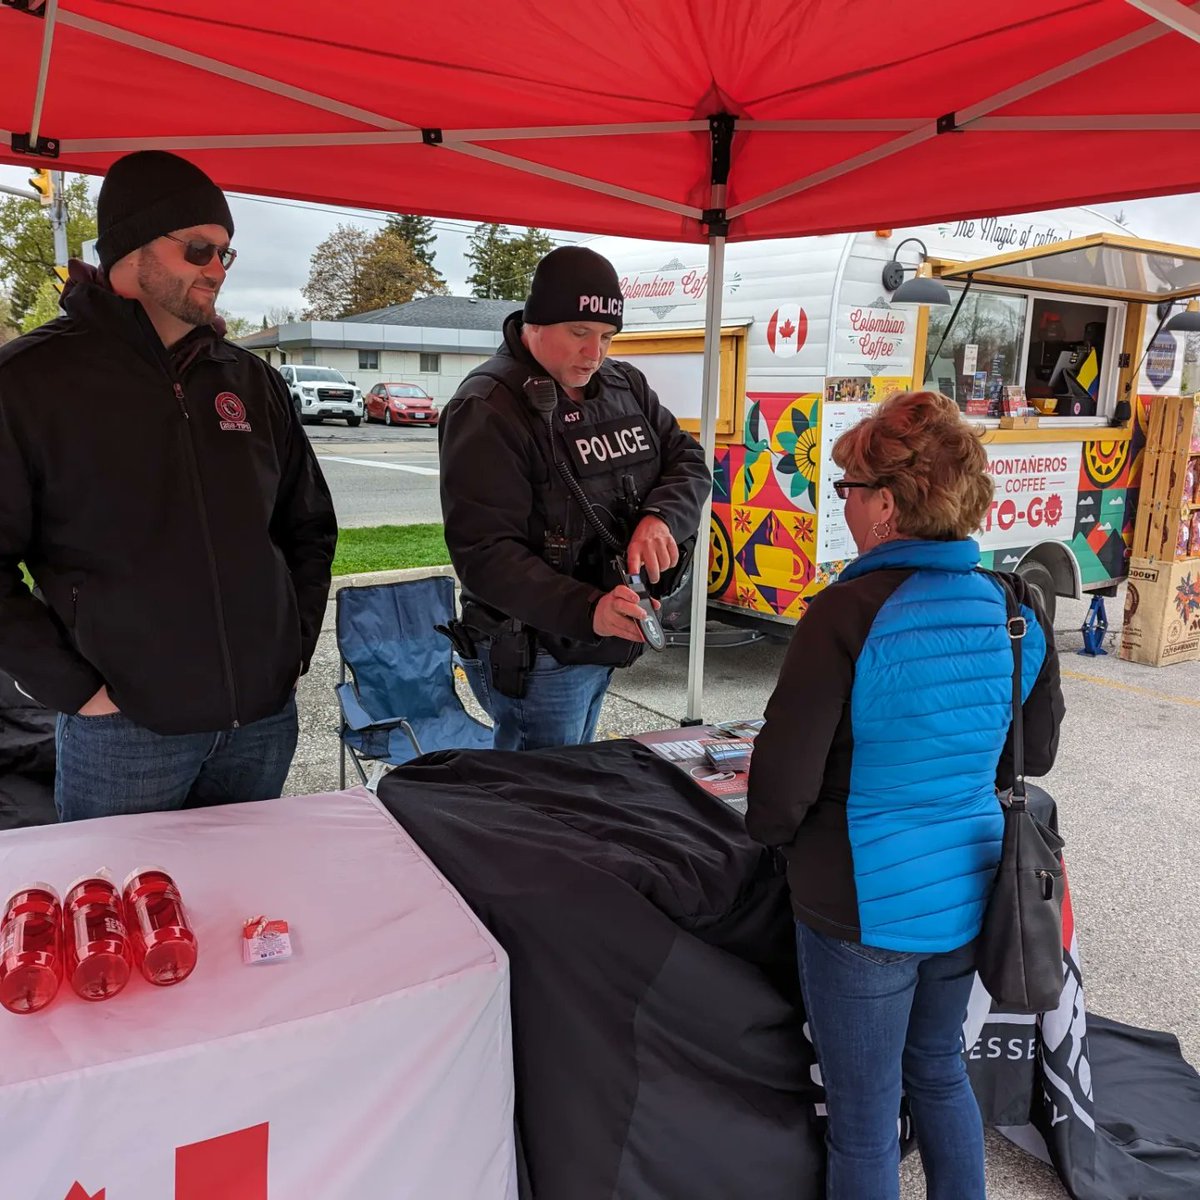 Crime Stoppers had a successful morning out with Windsor Police Service Auto Theft Unit handing out information on our program as well as assisting with handing out faraday bags to the public. We are thankful for Montaneros Coffee to-go as well! Stay tuned where we will be next!